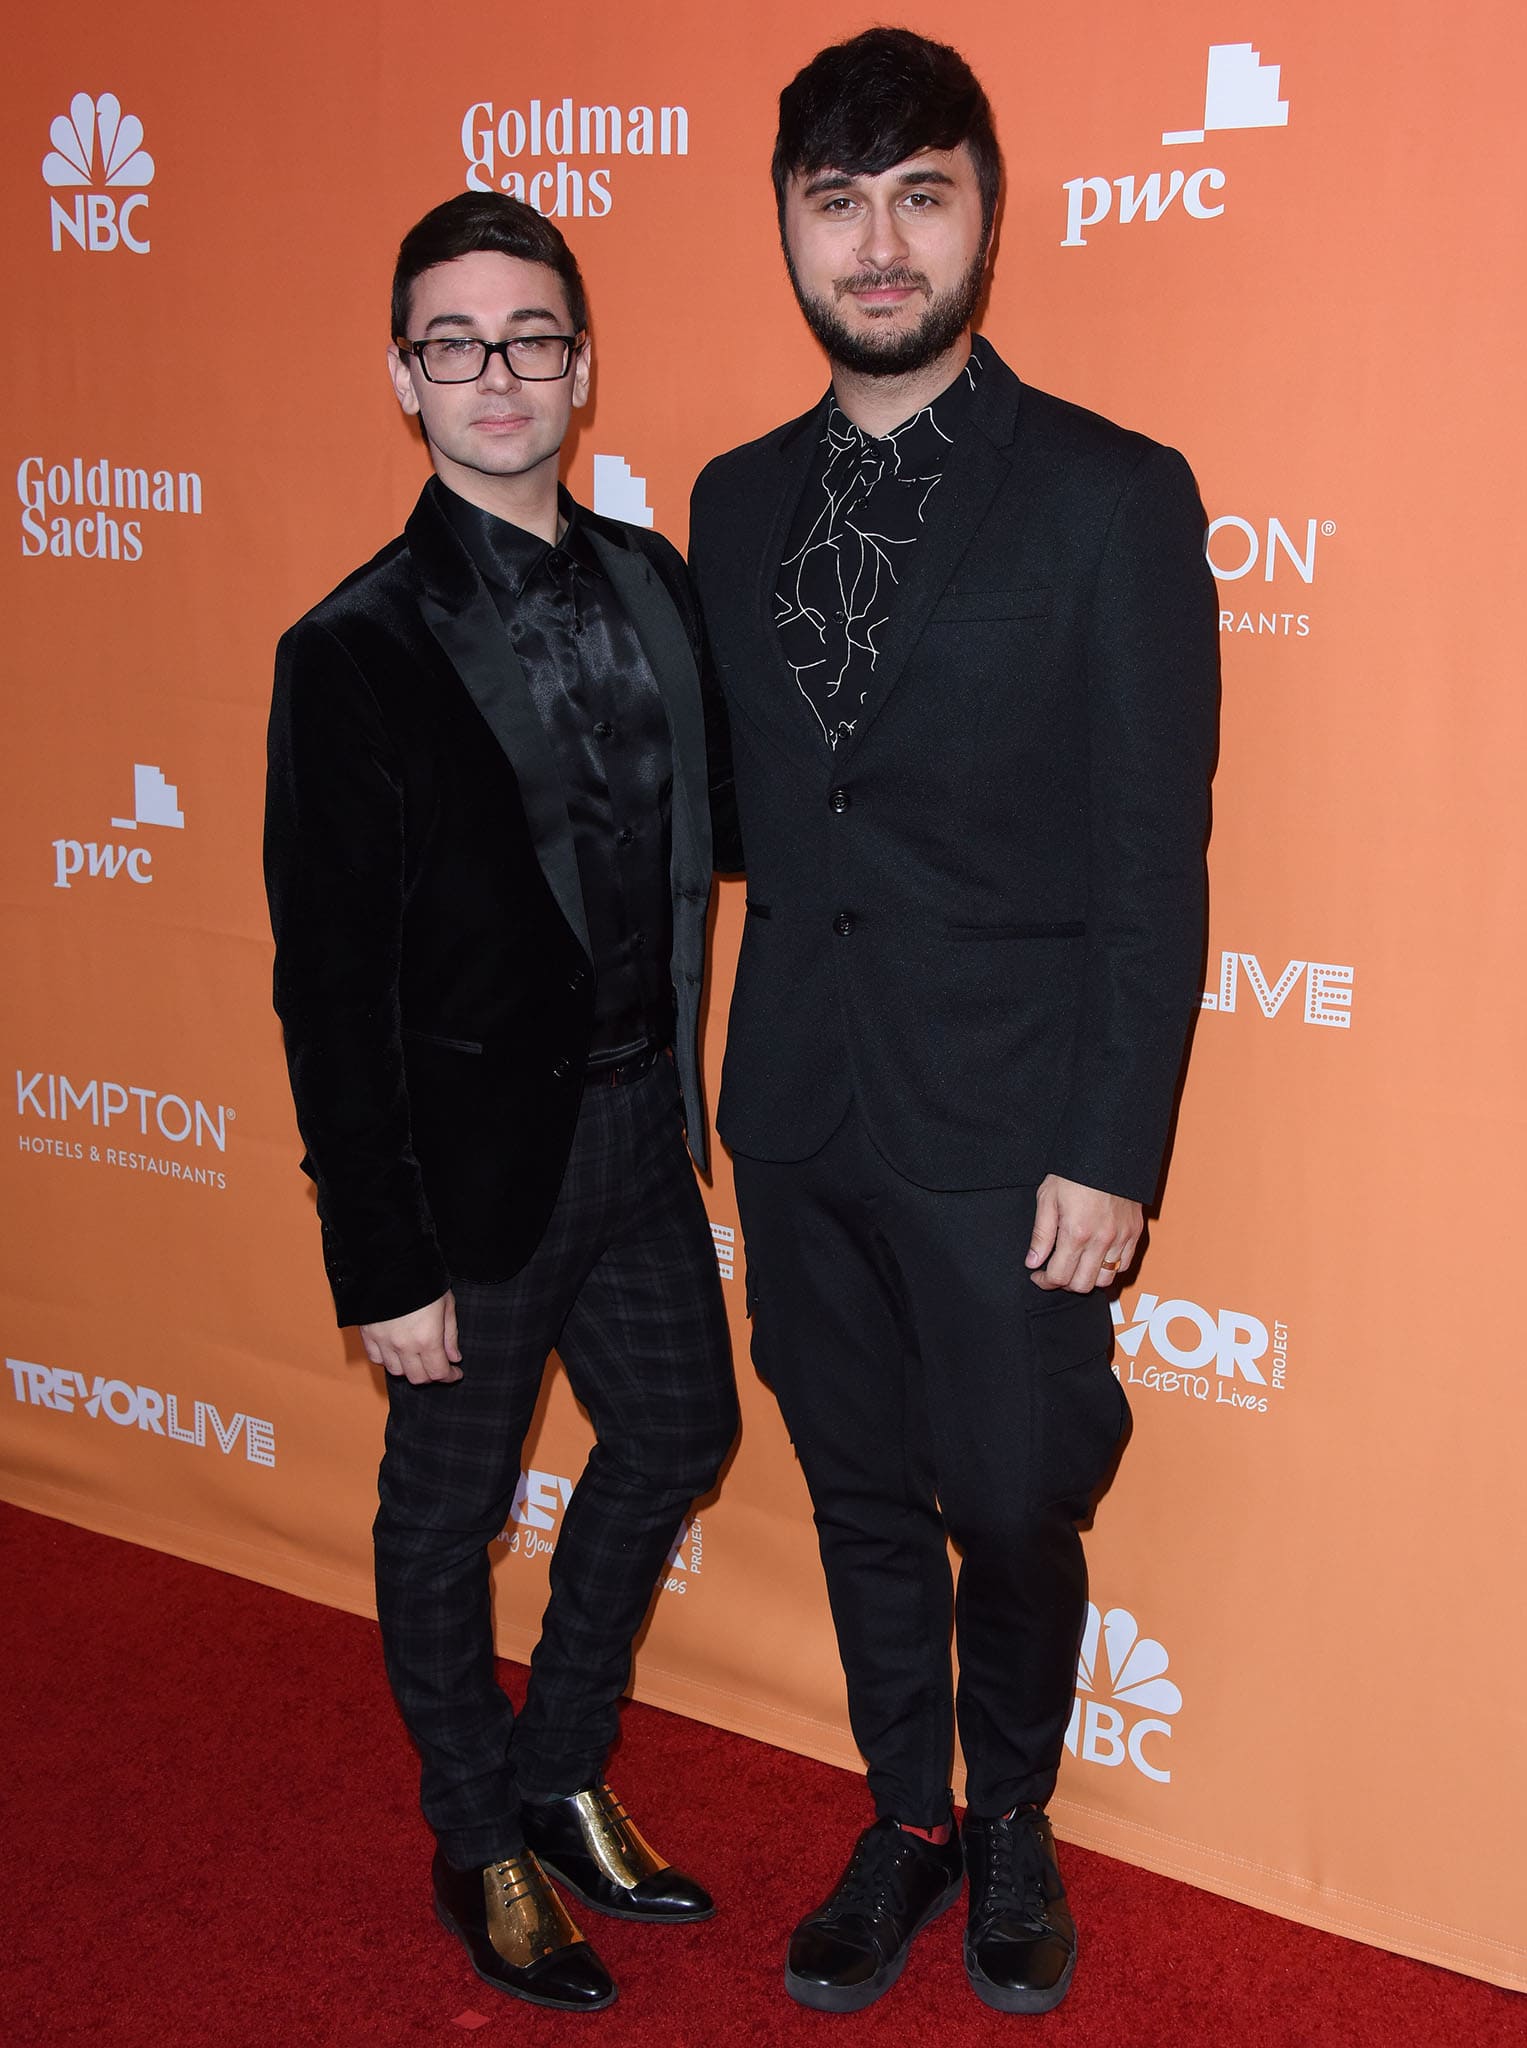 Christian Siriano's Net Worth: How Dresses and Shoes Made Him Rich